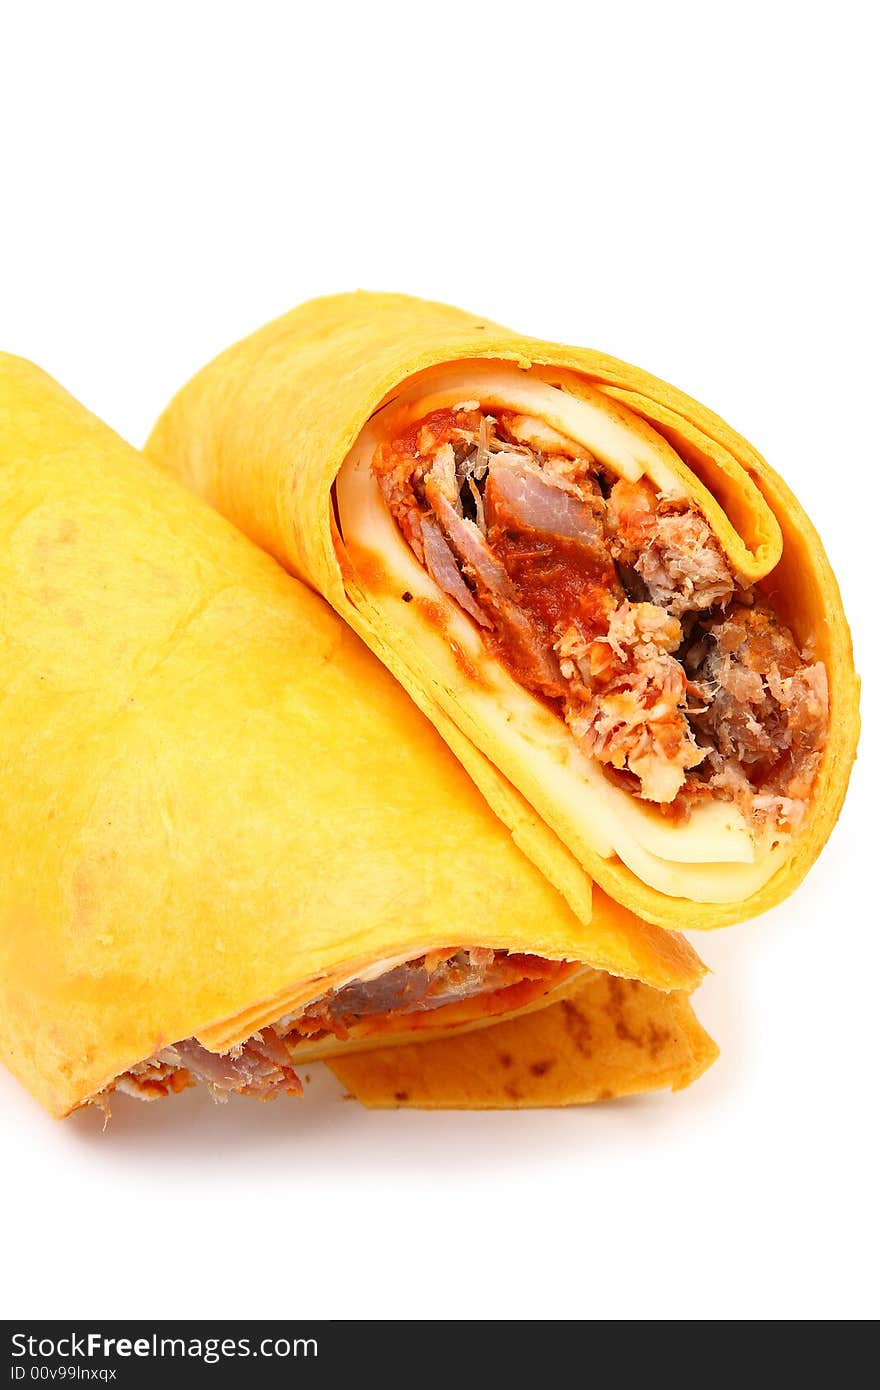 Pulled Pork and Provolone Wrap and spicy bbq sauce.